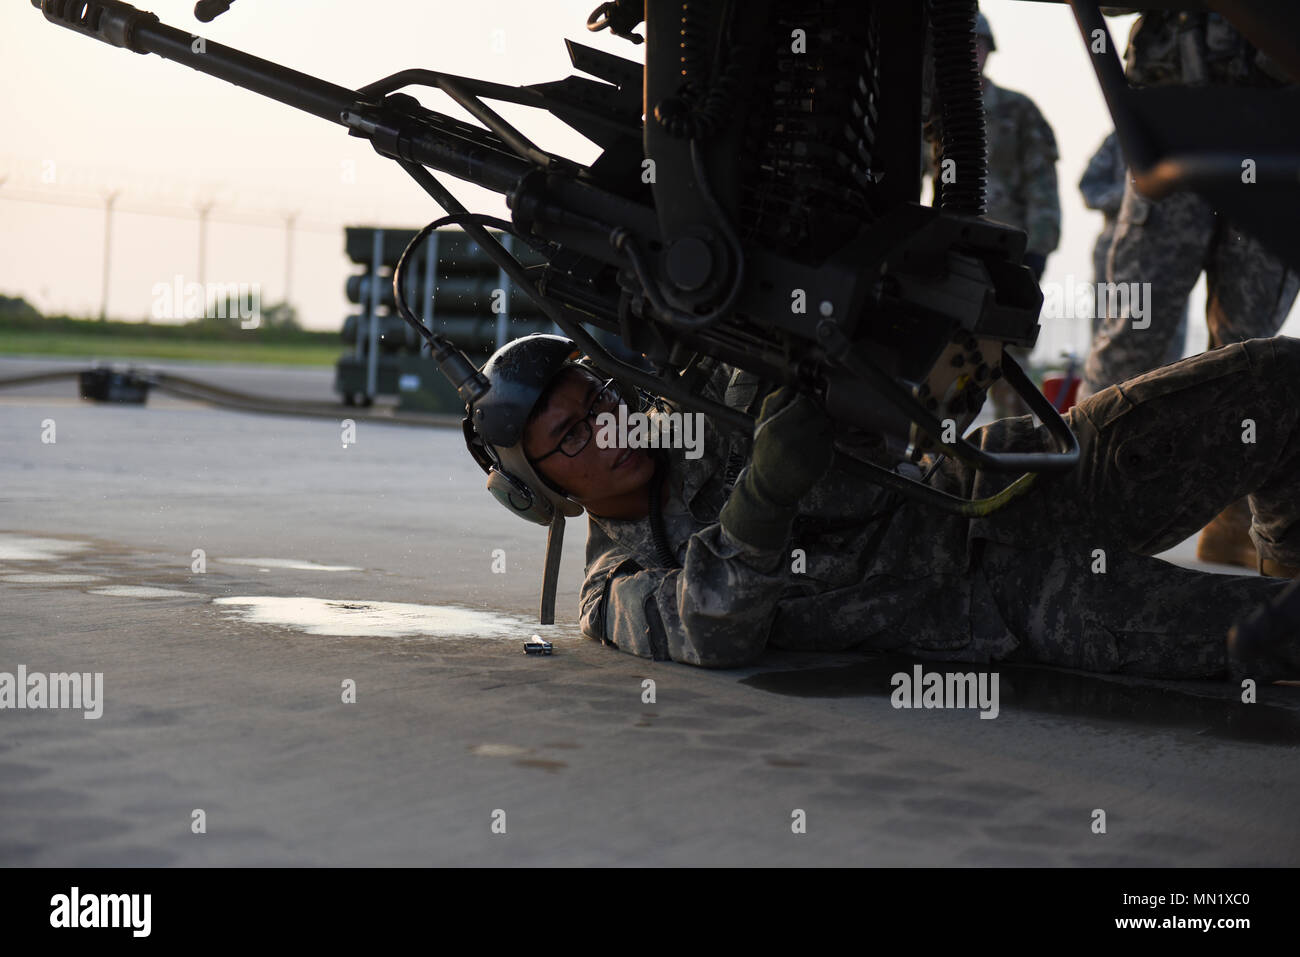 U.S. Army Spc. Kyusuk Jang, an Apache avionics armament specialist from 4-2 ARB, 2CAB, cleans a 30mm machine gun on an AH-64 Apache helicopter at Kunsan Air Base, Republic of Korea, Aug. 7, 2017. The 4-2 Attack Reconnaissance Battalion, 2nd Combat Aviation Brigade, distribution platoon participated in a joint Forward Arming and Refueling Point at Kunsan which allowed the 2CAB to extend its reach beyond what was originally possible for them. (U.S. Air Force photo by Senior Airman Michael Hunsaker/released) Stock Photo